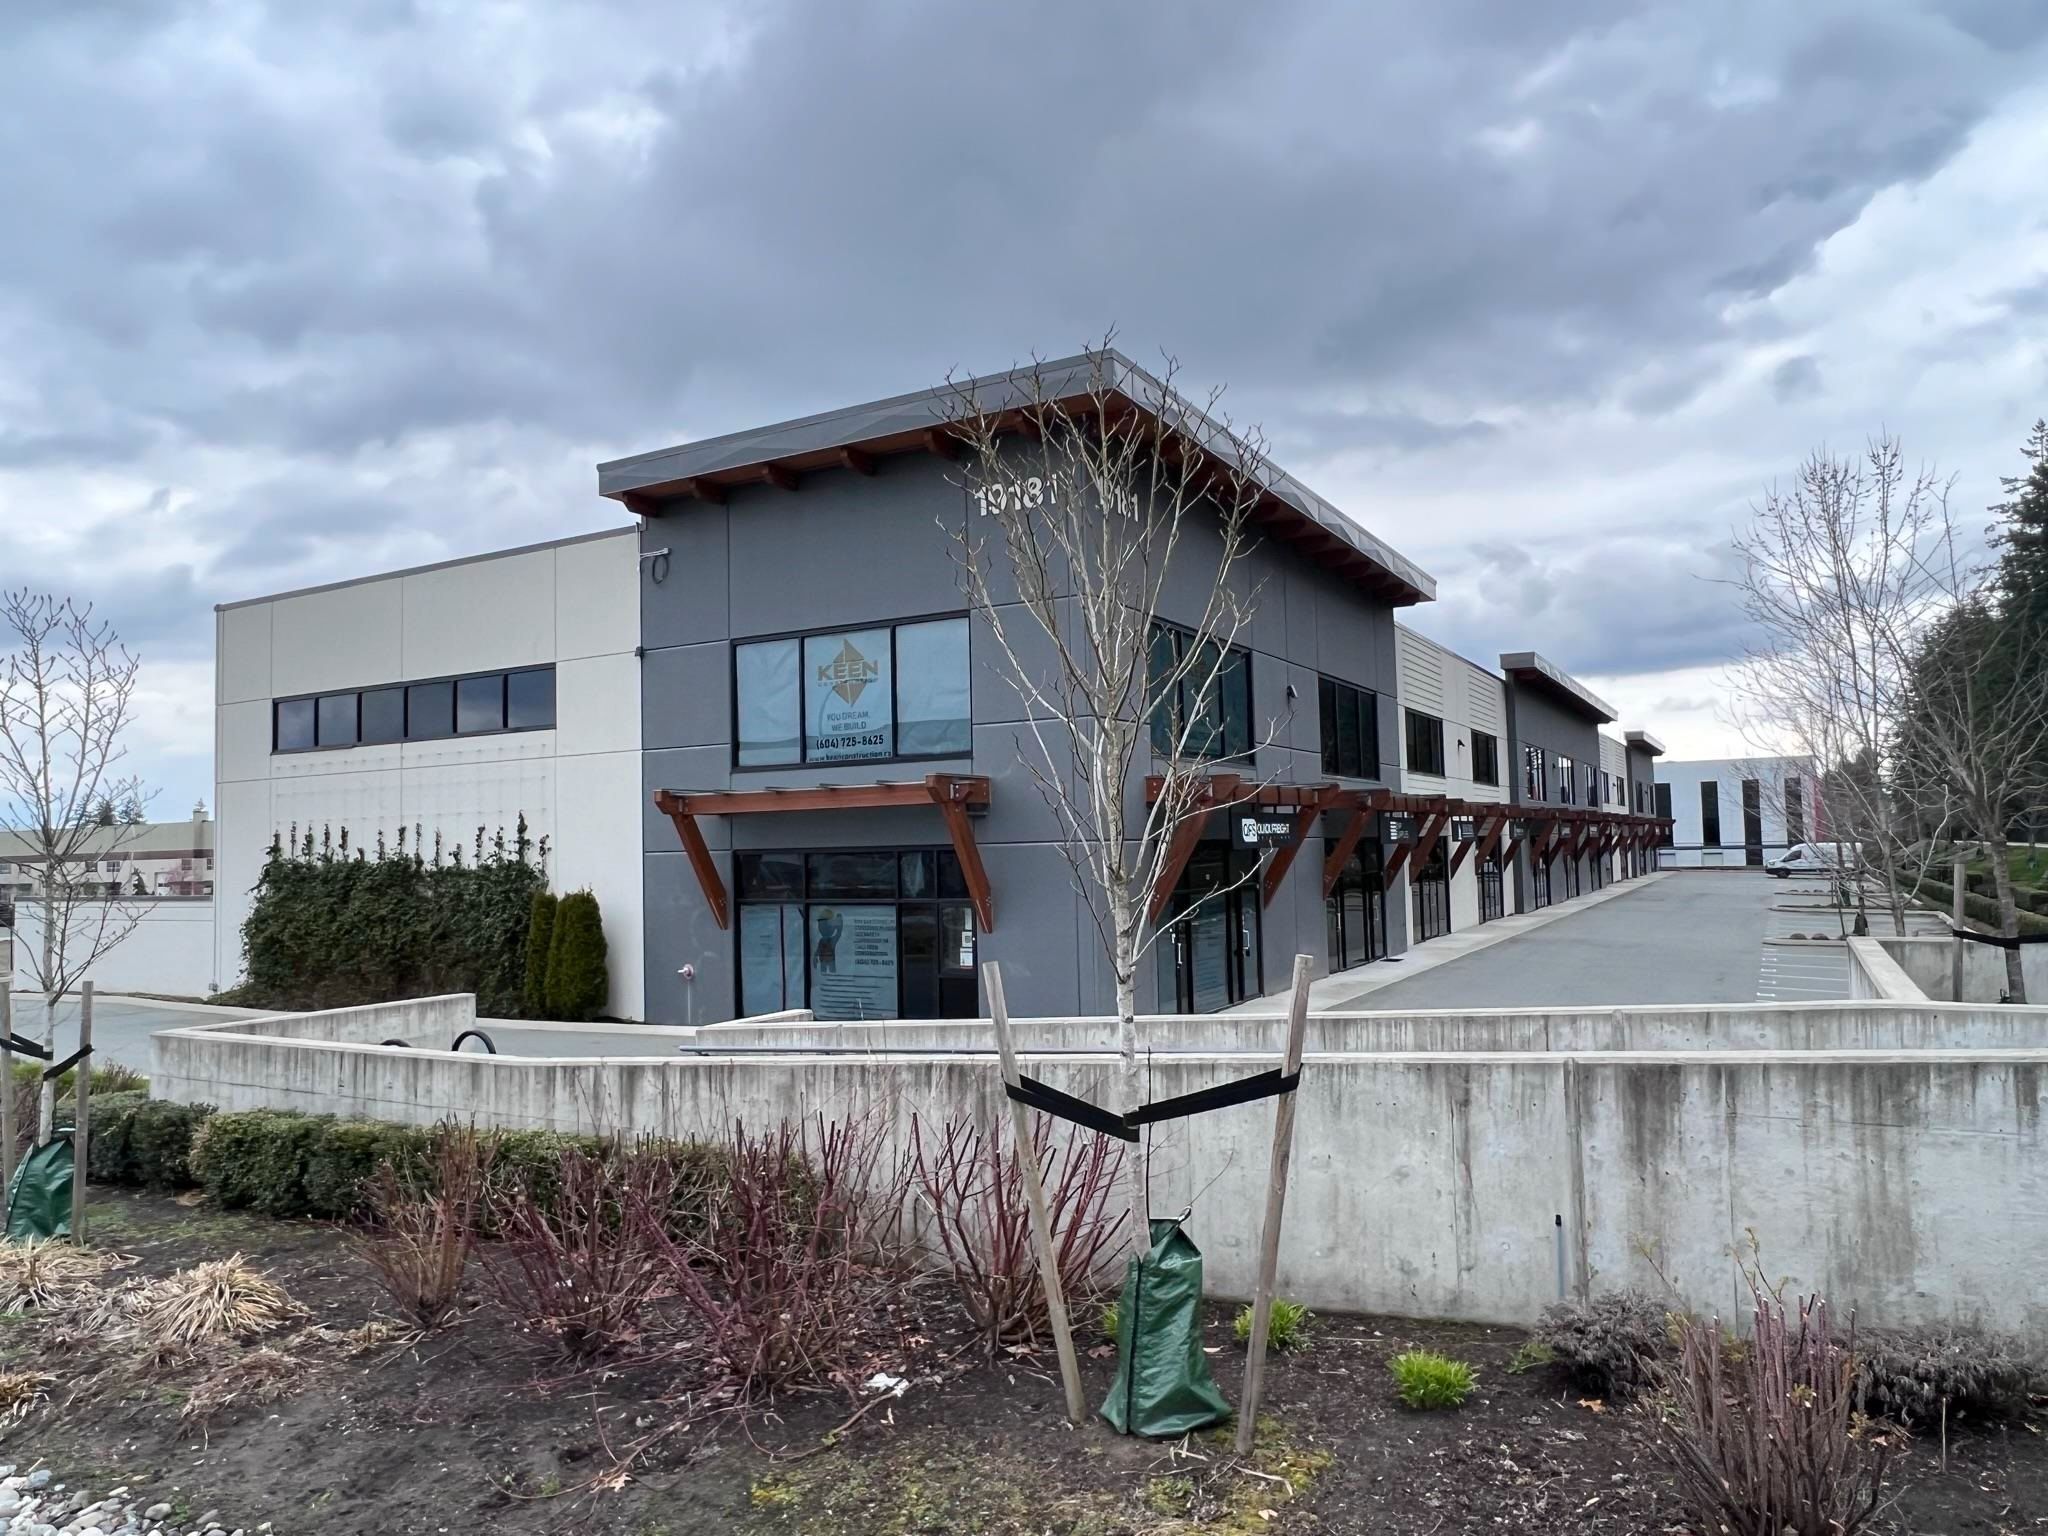 Main Photo: 109 19181 34A AVENUE in Surrey: Serpentine Office for lease (Cloverdale)  : MLS®# C8050365